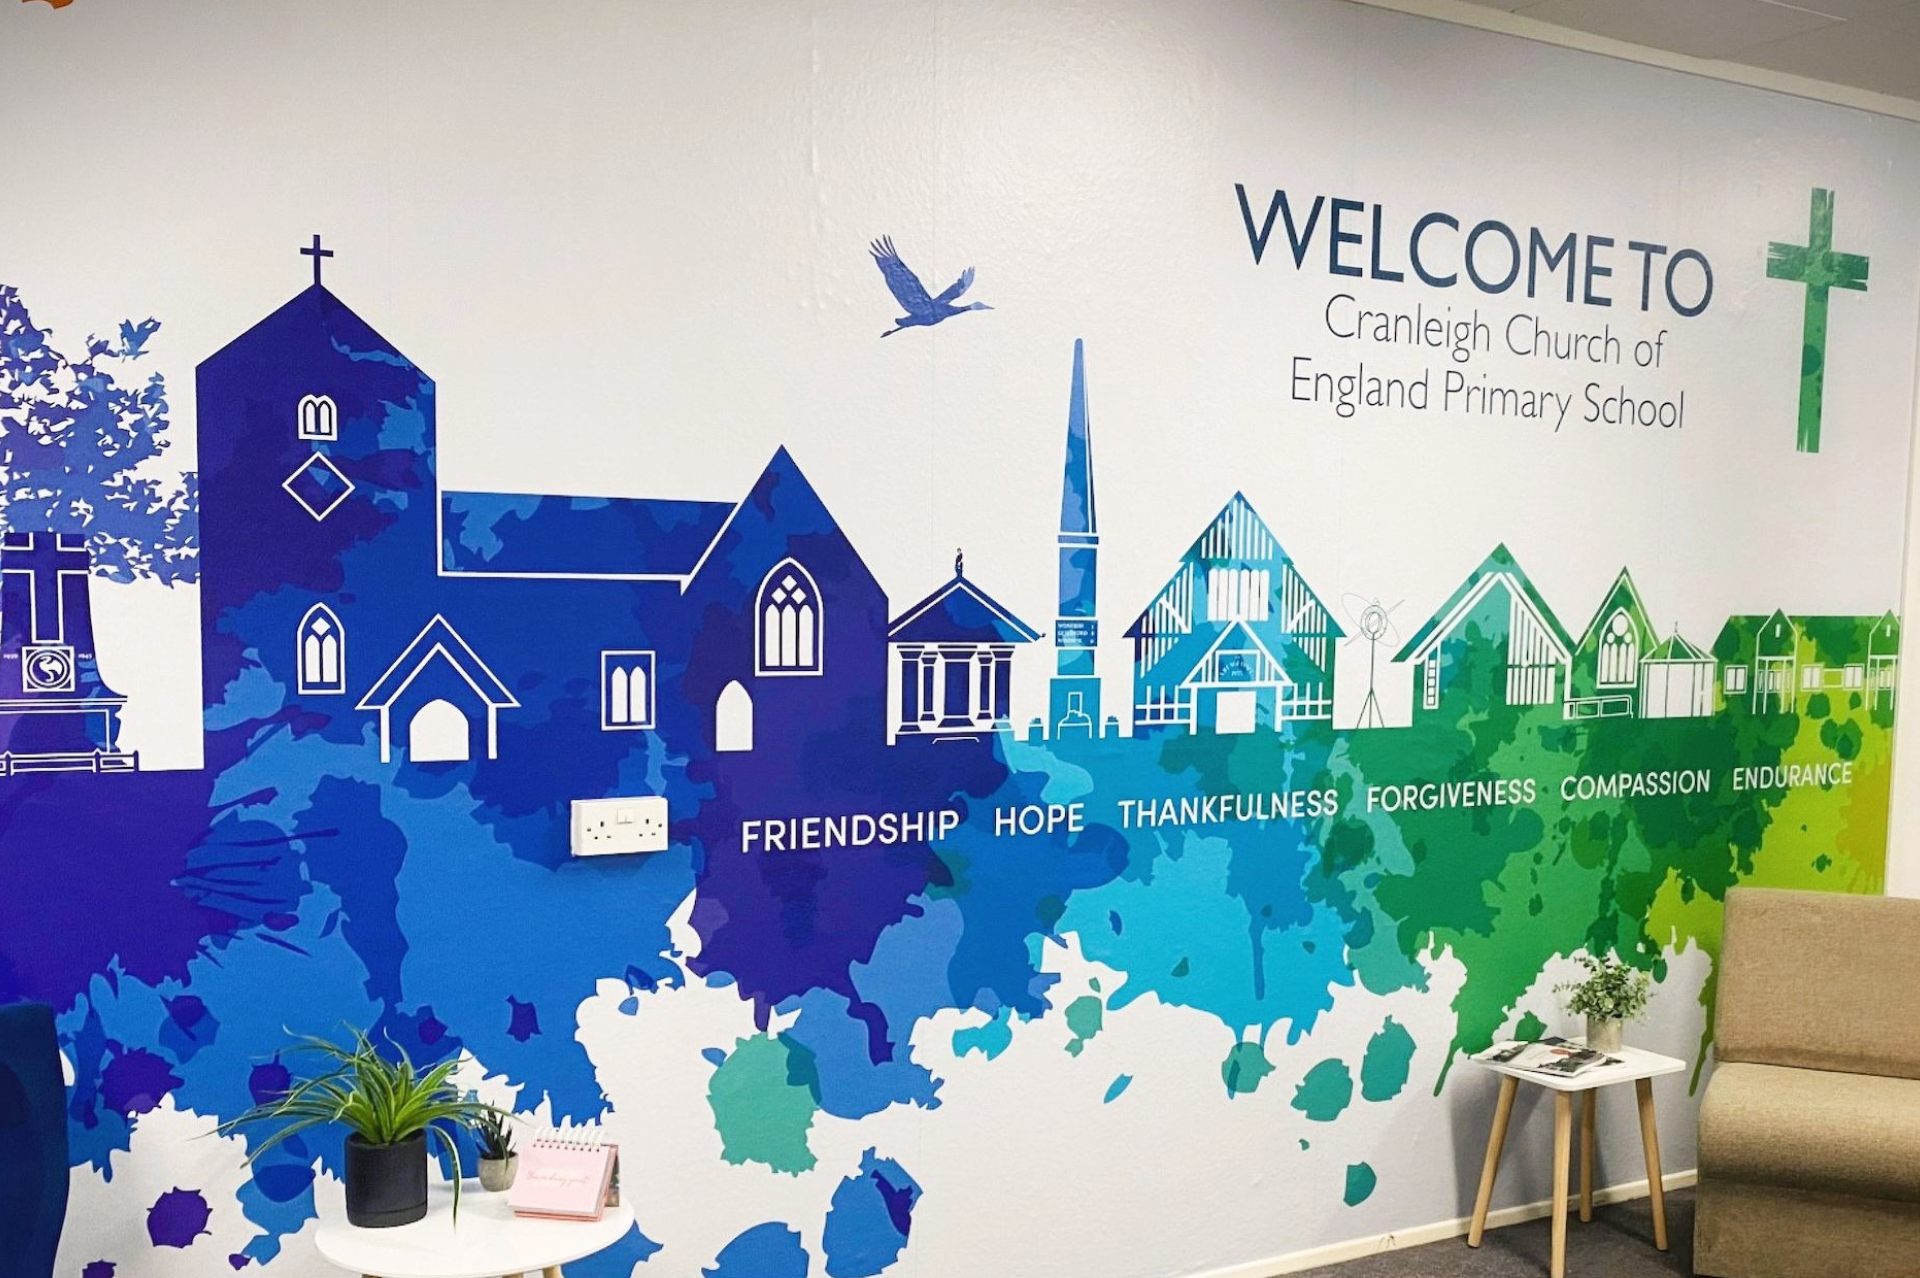 Photo of a wall in Cranleigh Church of England Primary School decorated with images of buildings from the village and the values of the school: friendship, hope, thankfulness, forgiveness, compassion and endurance